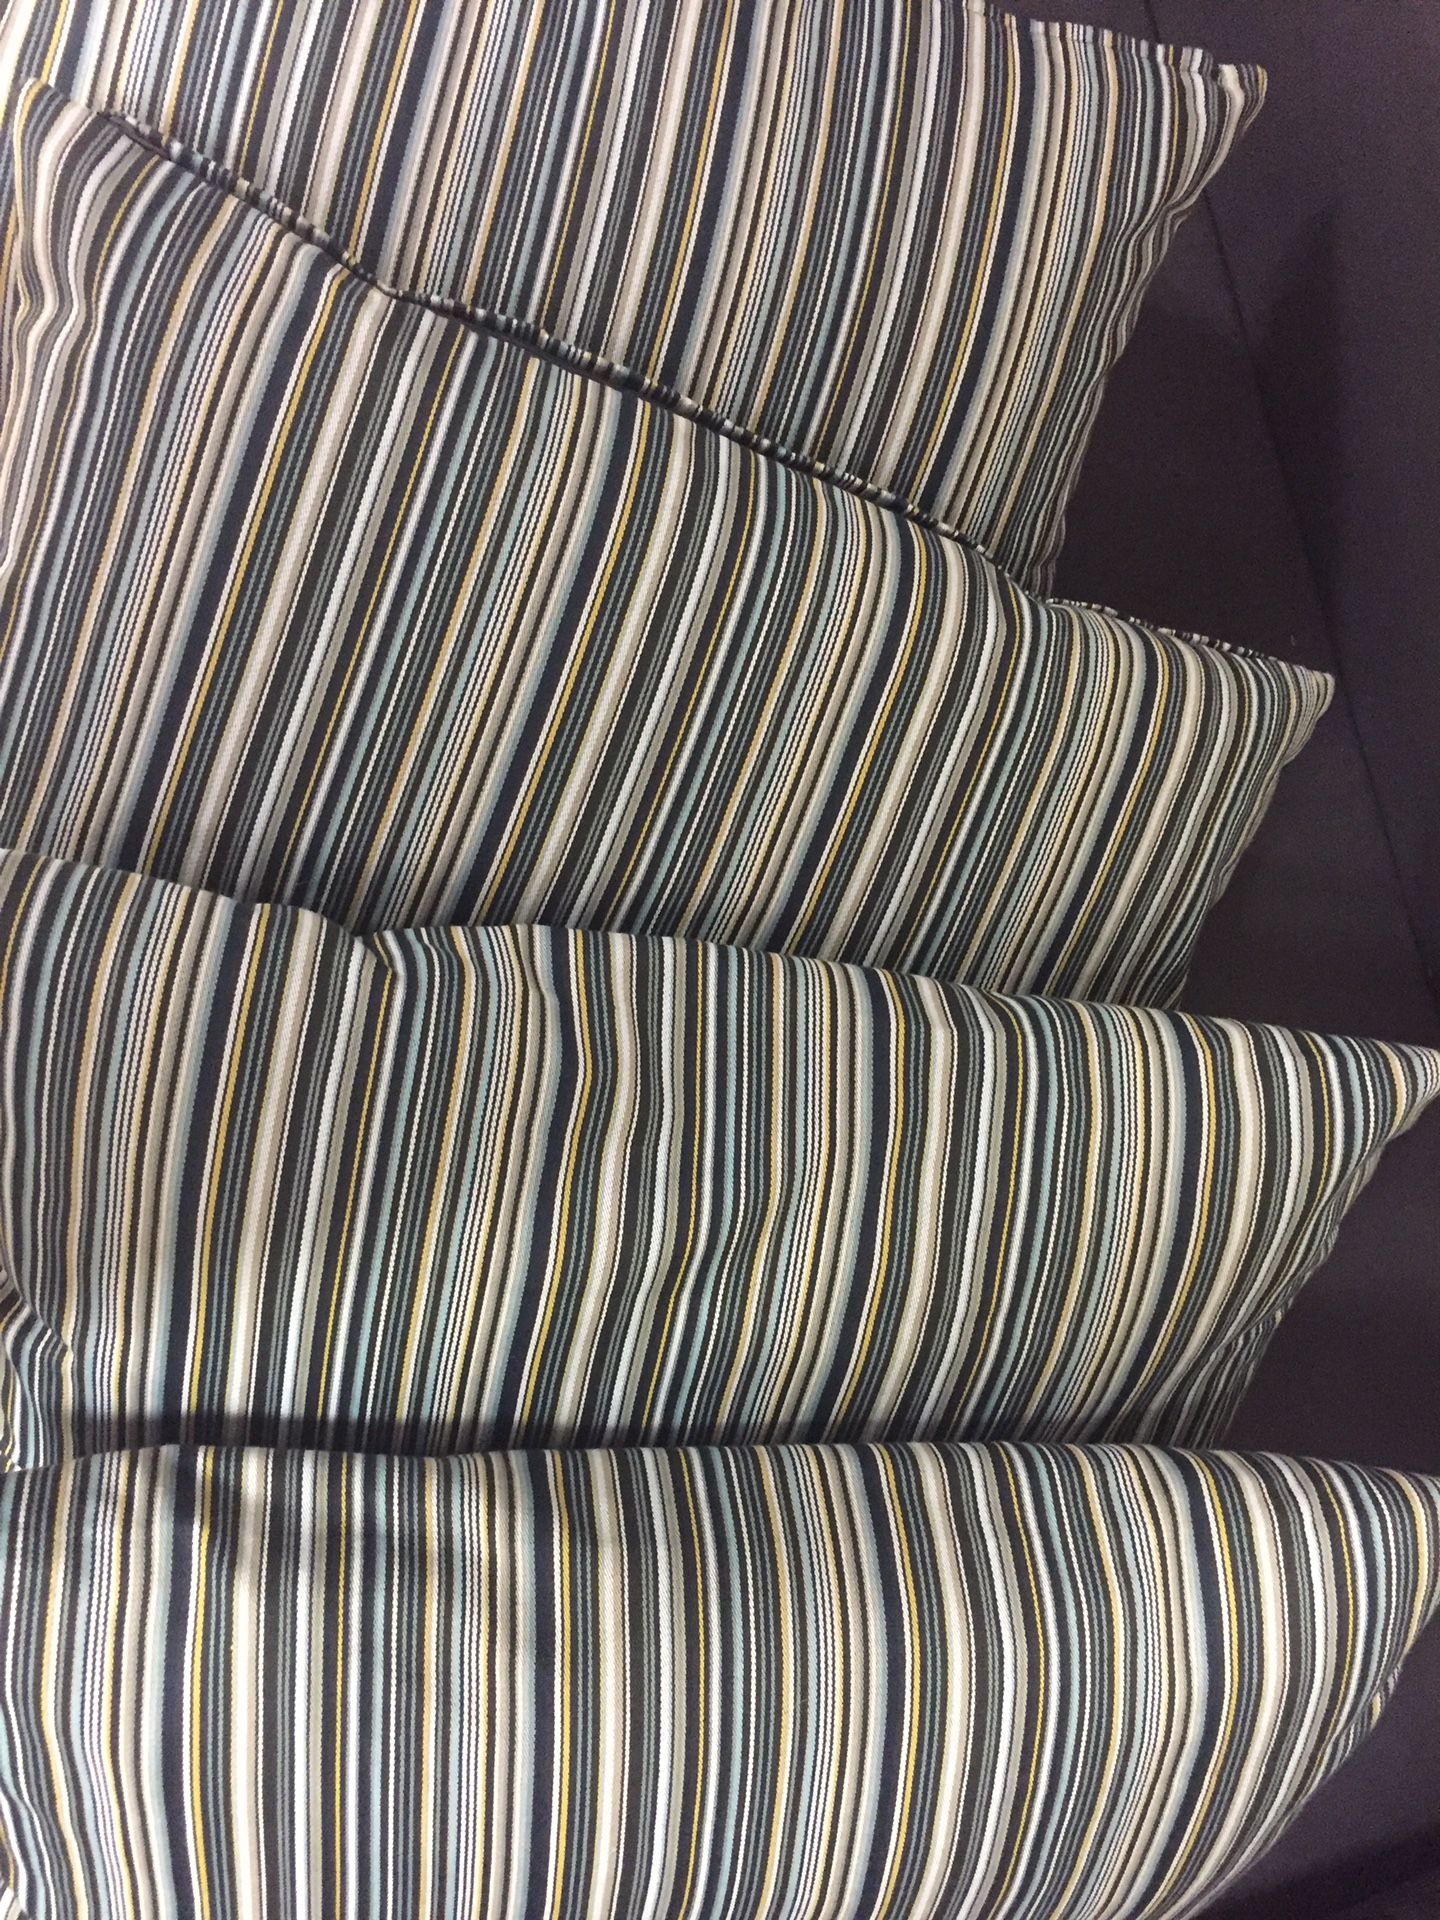 4 striped pillows. 24in x 12in